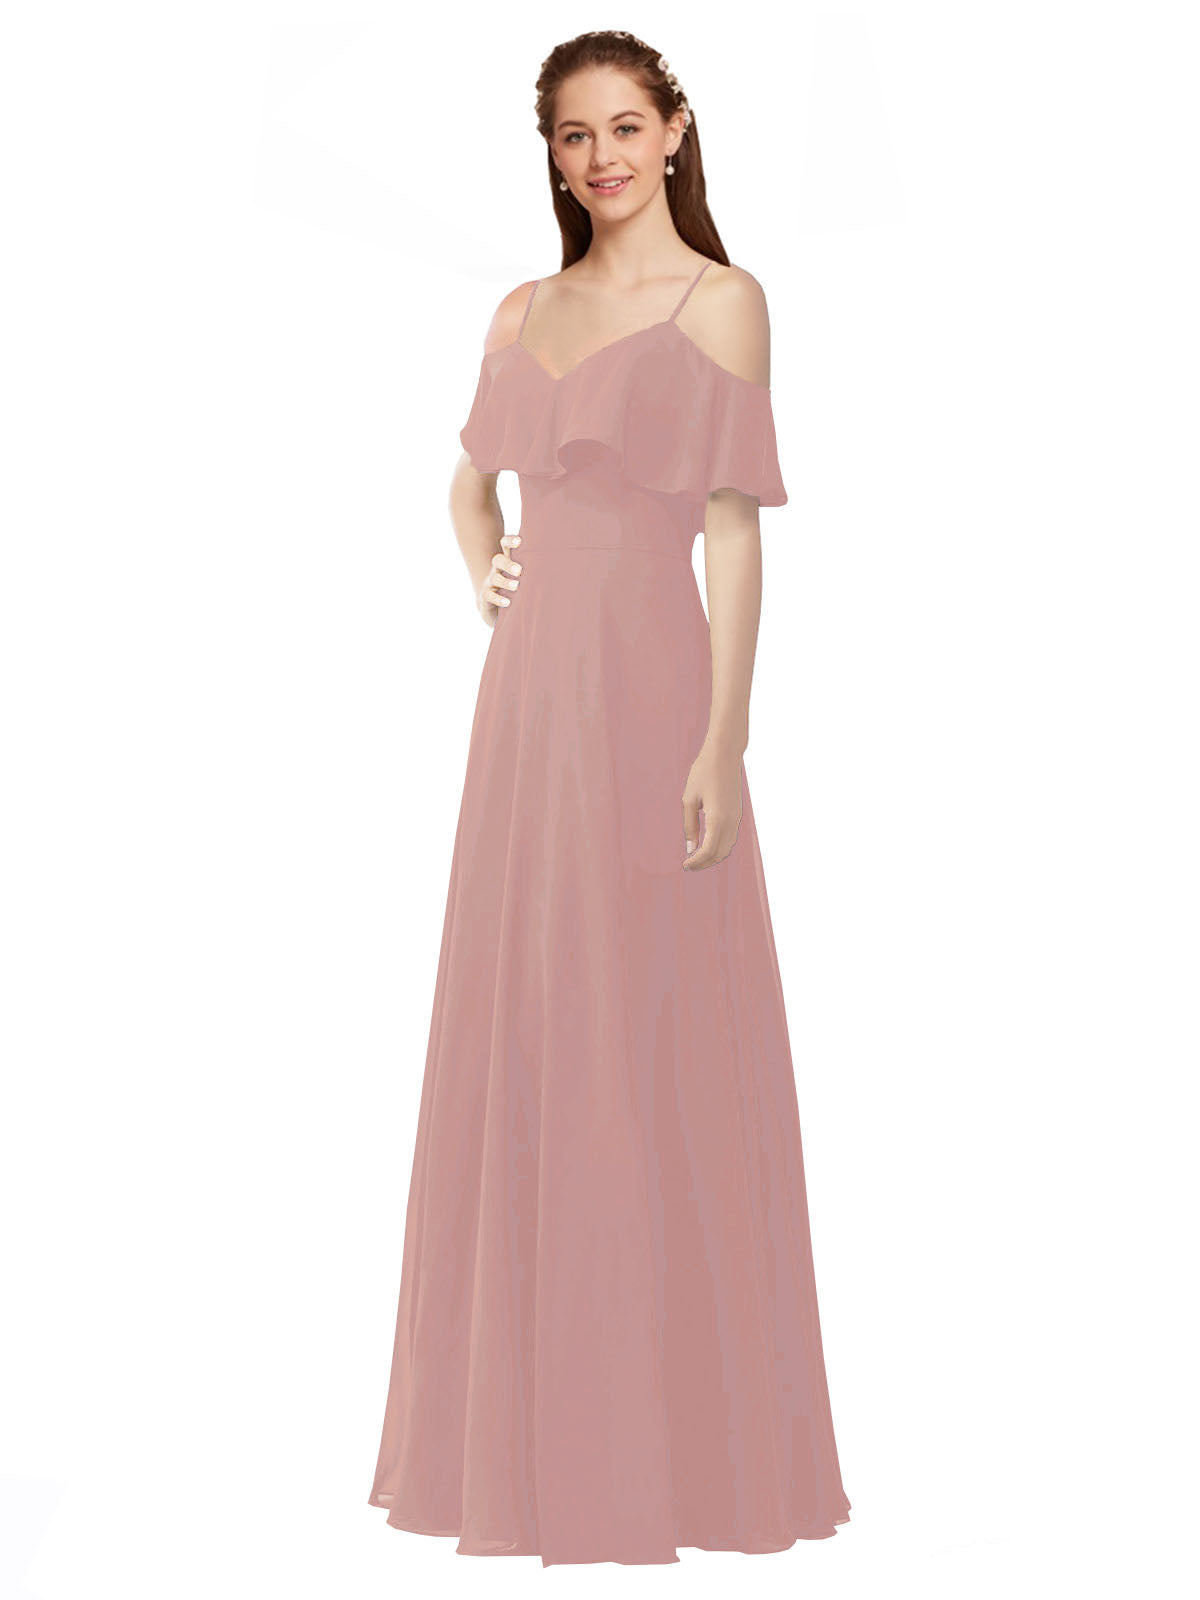 Dusty Pink A-Line Off the Shoulder V-Neck Sleeveless Long Bridesmaid Dress Marianna